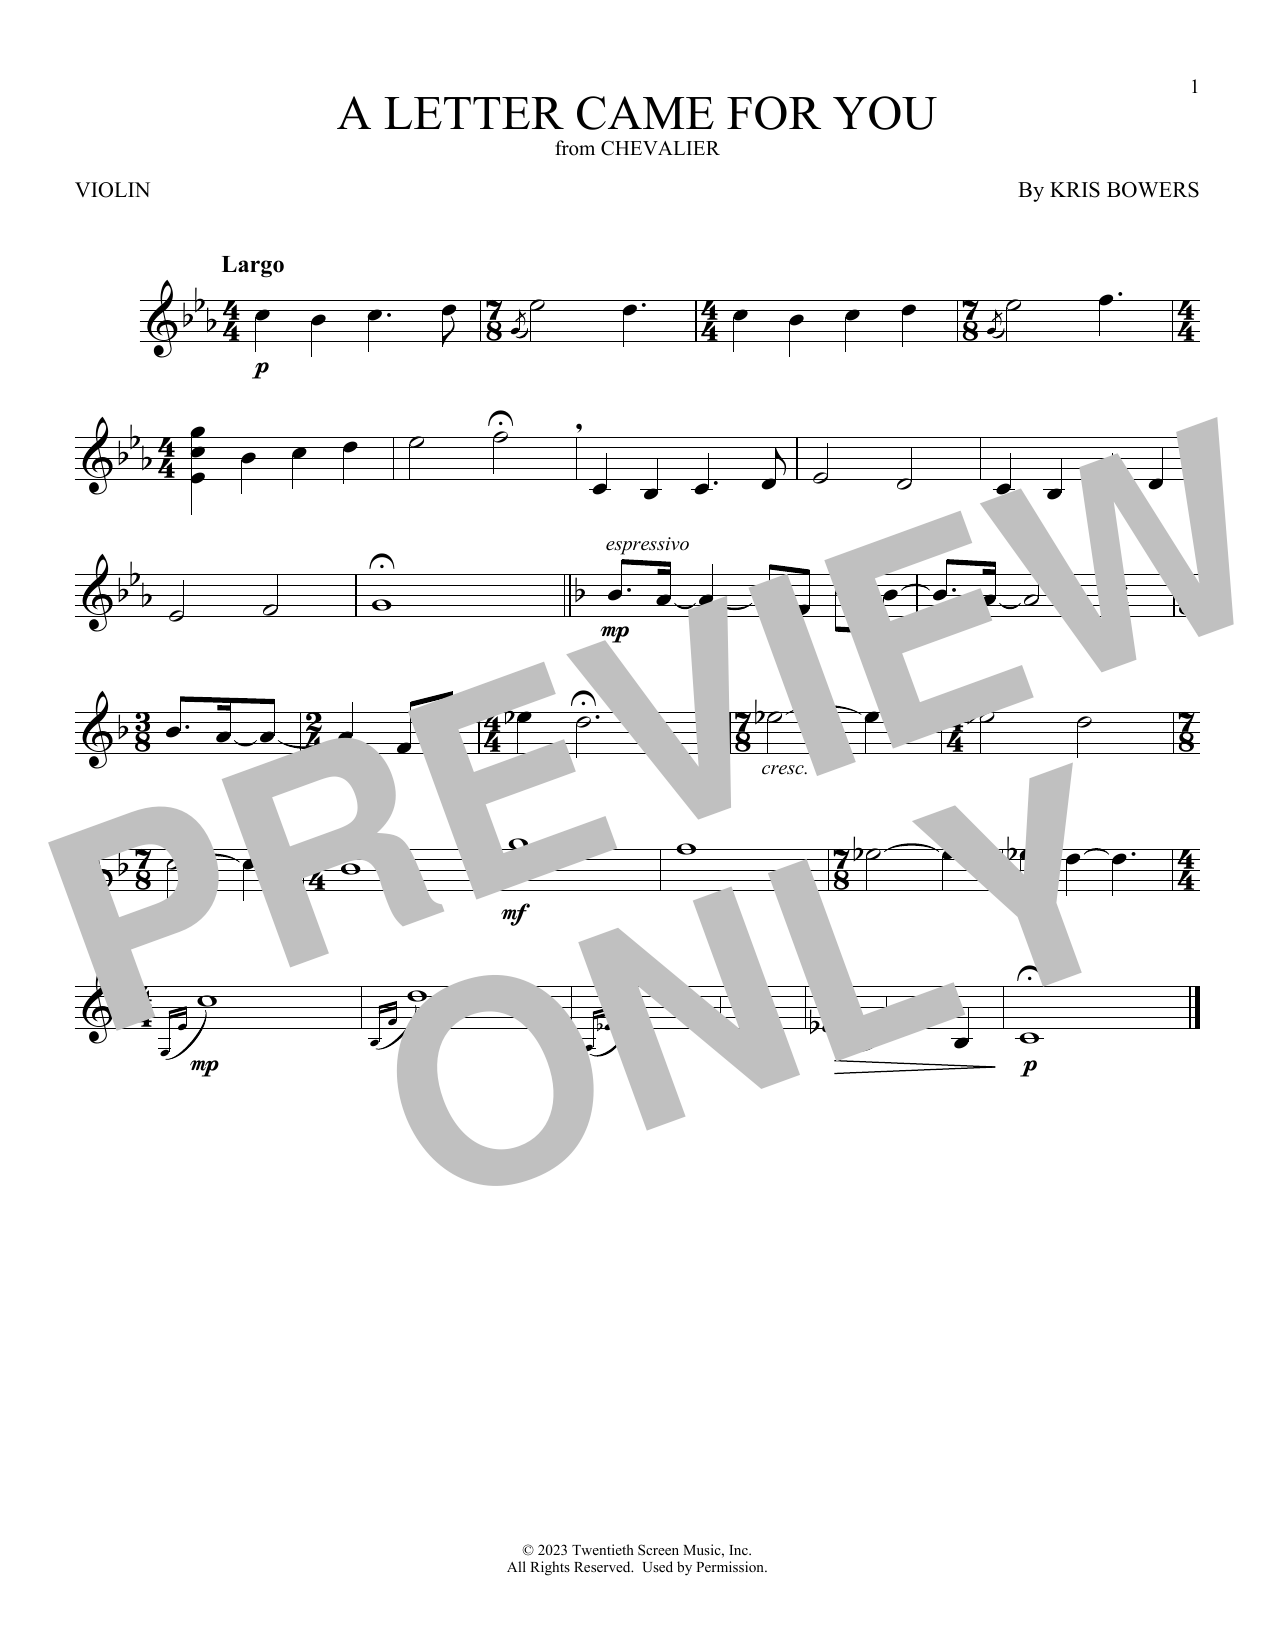 Download Kris Bowers A Letter Came For You (from Chevalier) Sheet Music